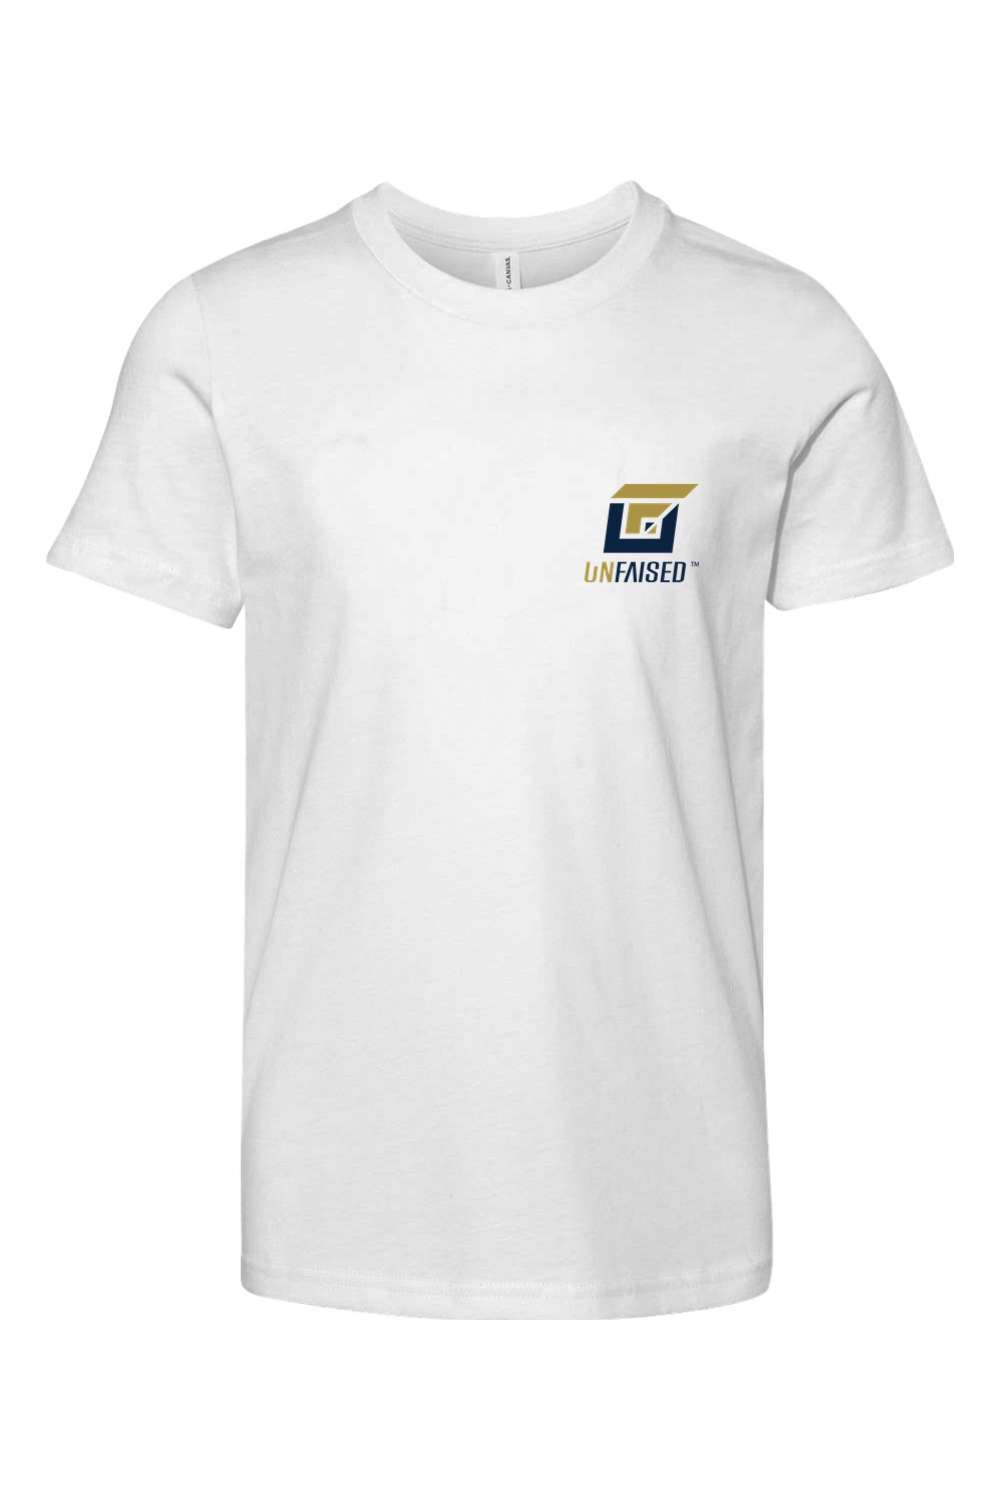 Unfaised White T-Shirt Generic Shersey